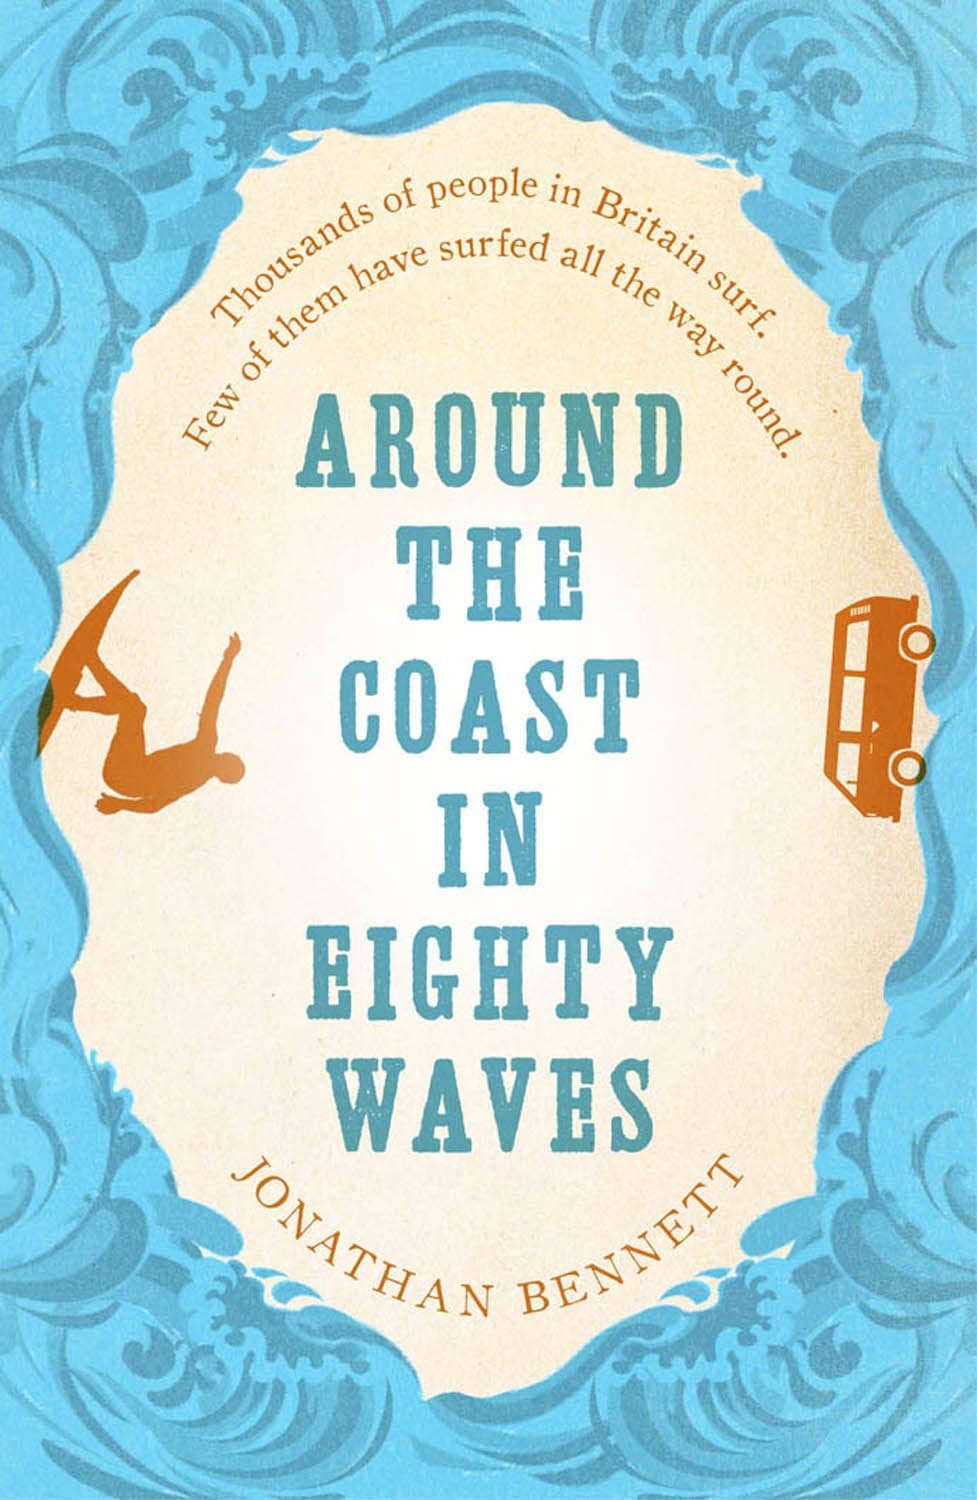 Around the Coast in Eighty Waves